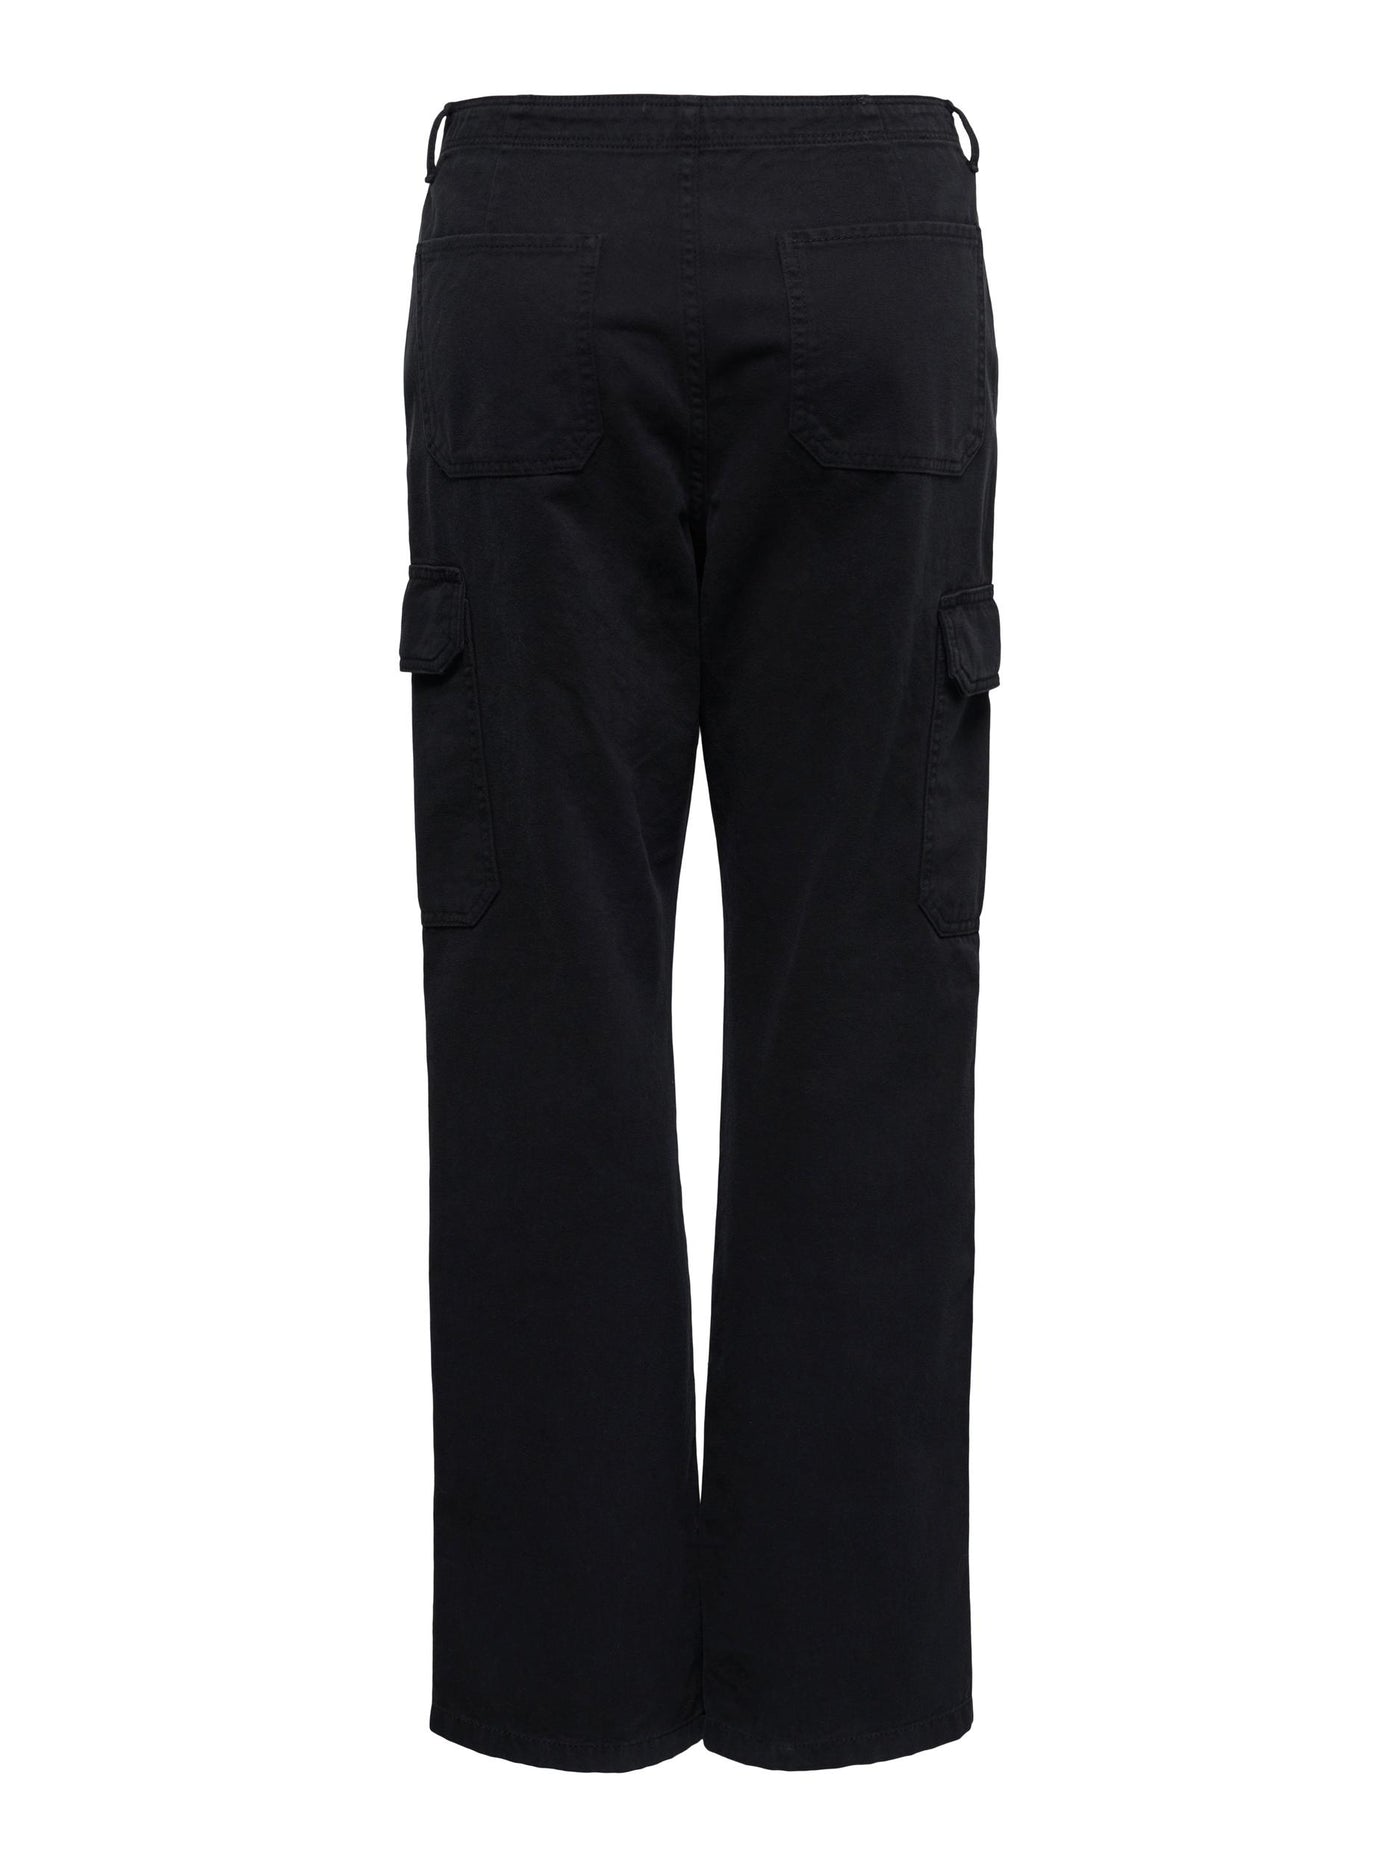 ONLMALFY CARGO PANT PNT NOOS